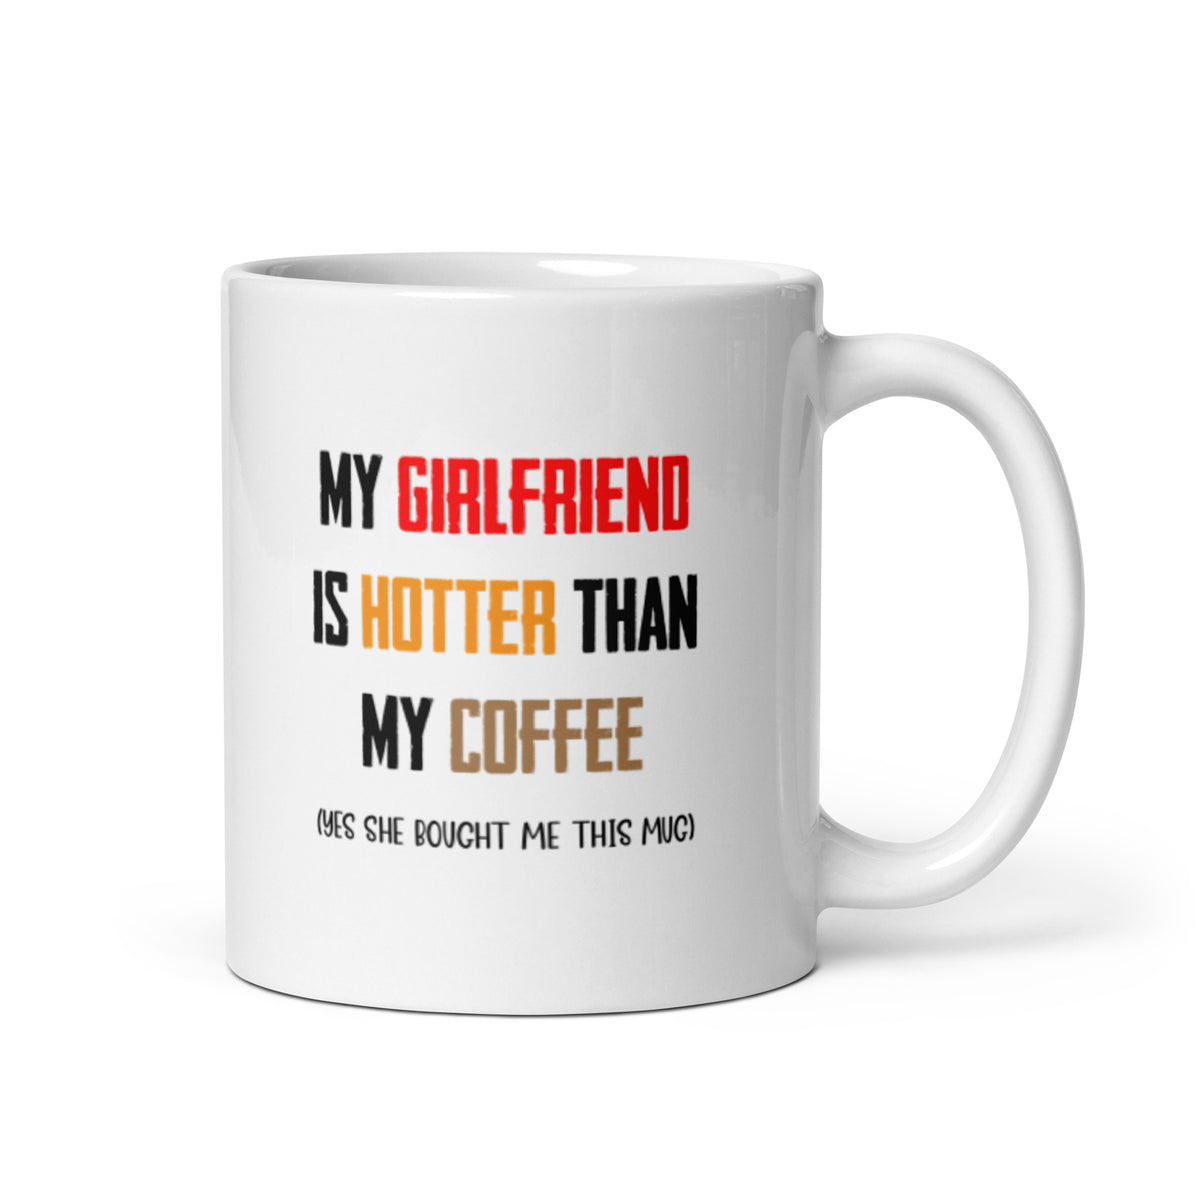 My Girlfriend is Hotter Than My Coffee (She Gave Me This Mug)